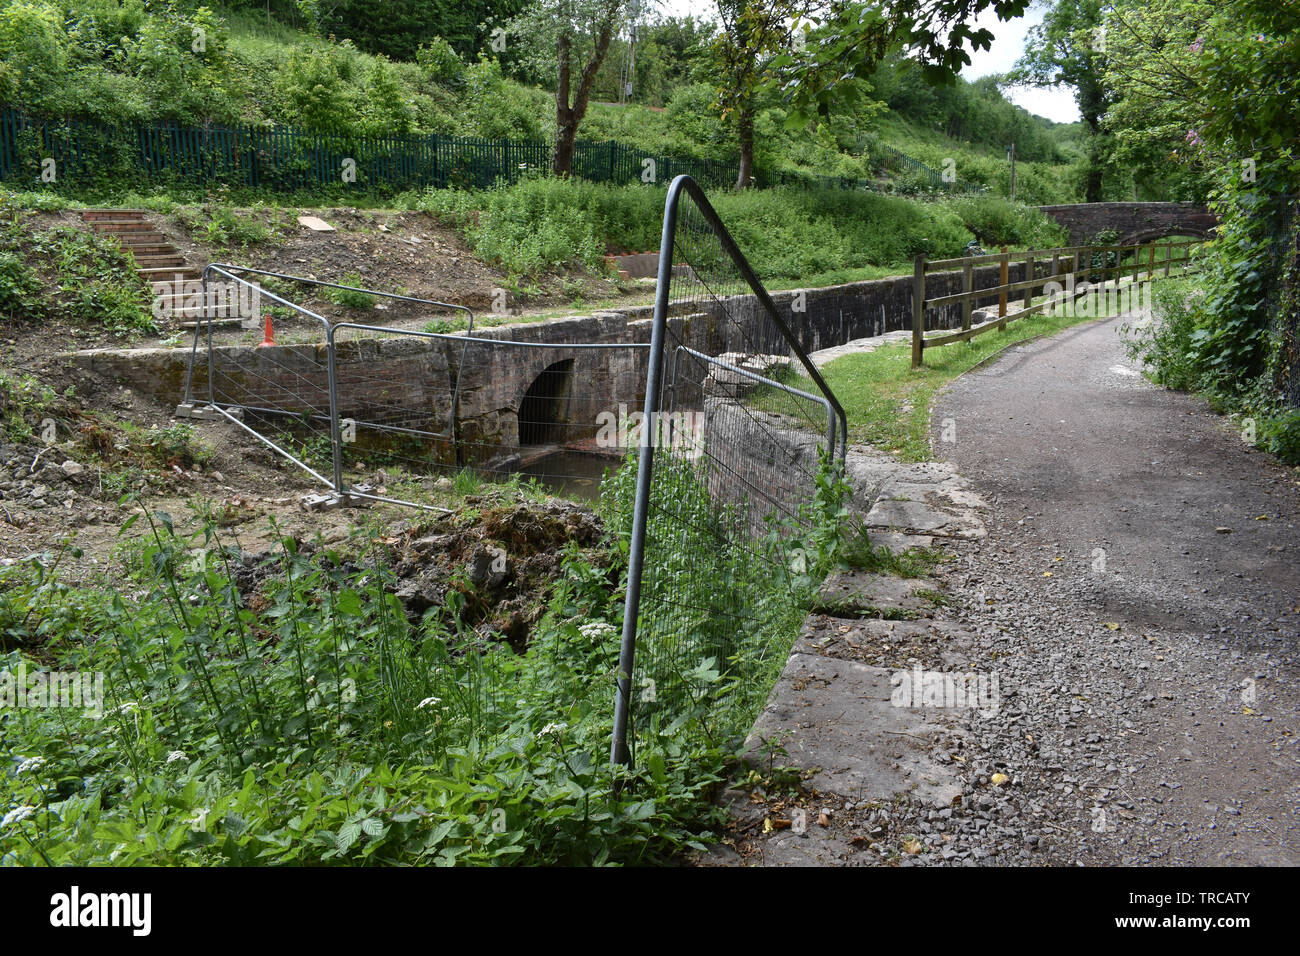 A derelict section of the Thames and Severn canal near Brimscombe, gloucestershire, UK Stock Photo